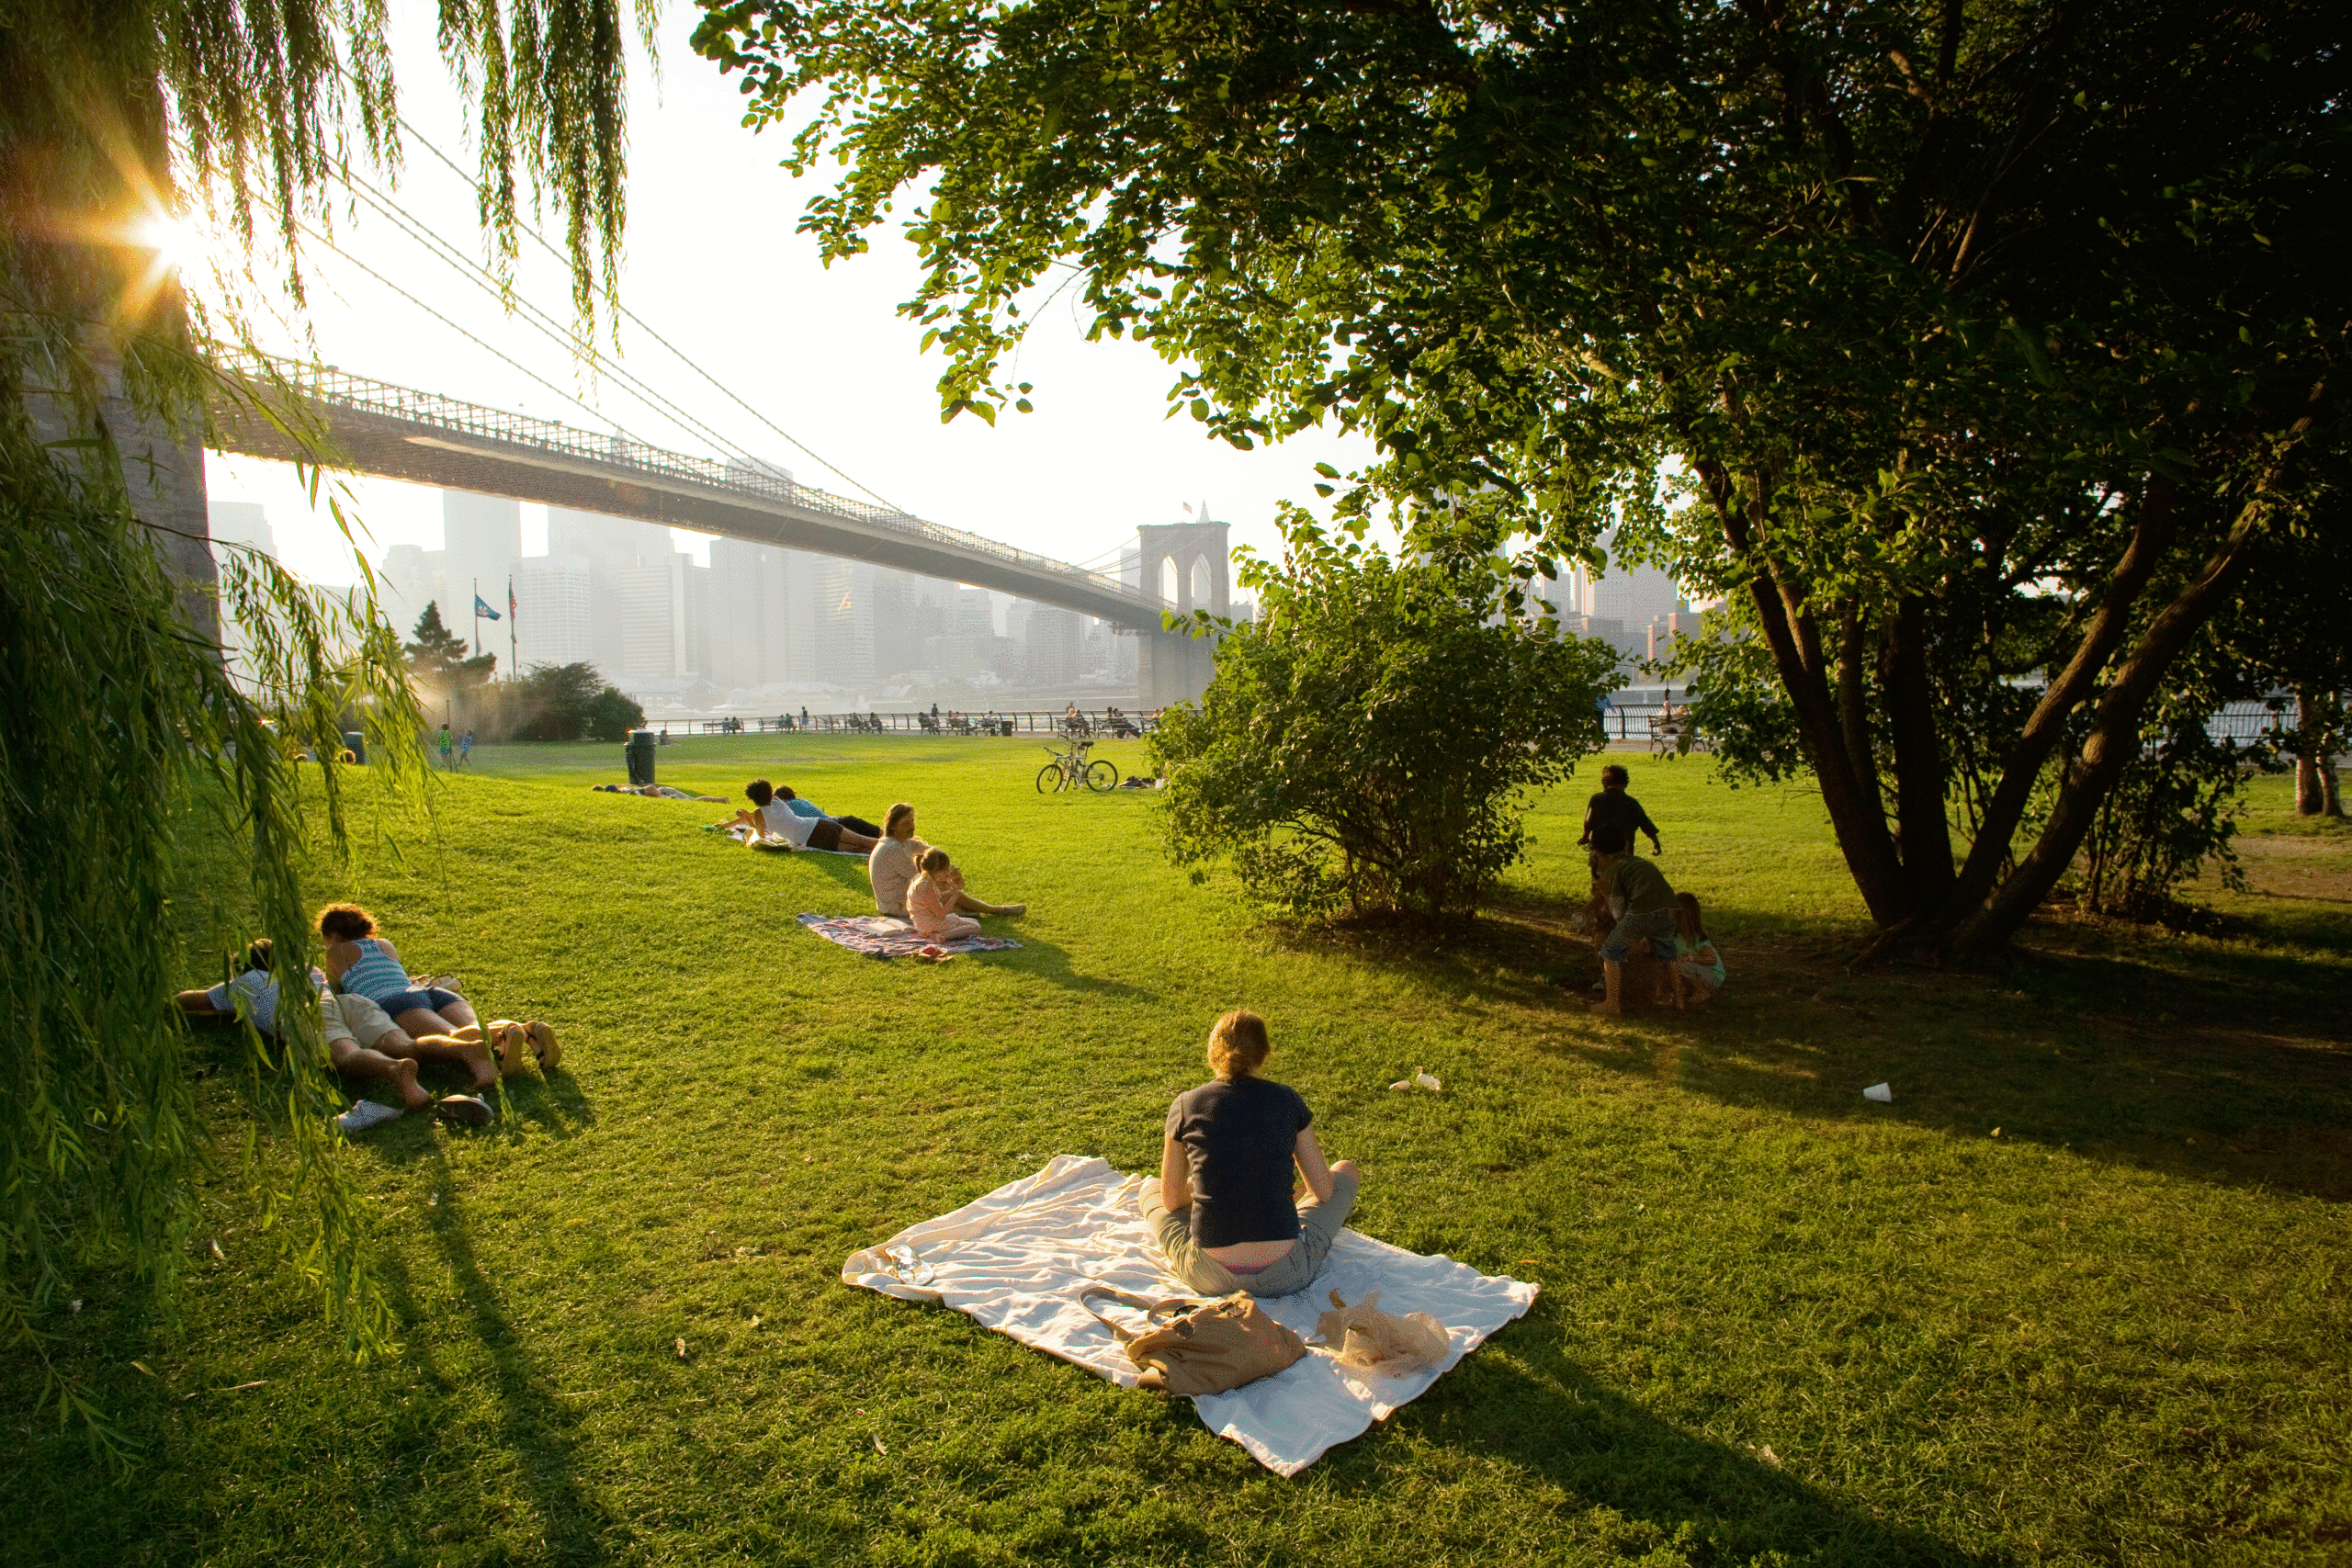 Several people and groups of people sit on blankets in a grassy field situated under a bridge.